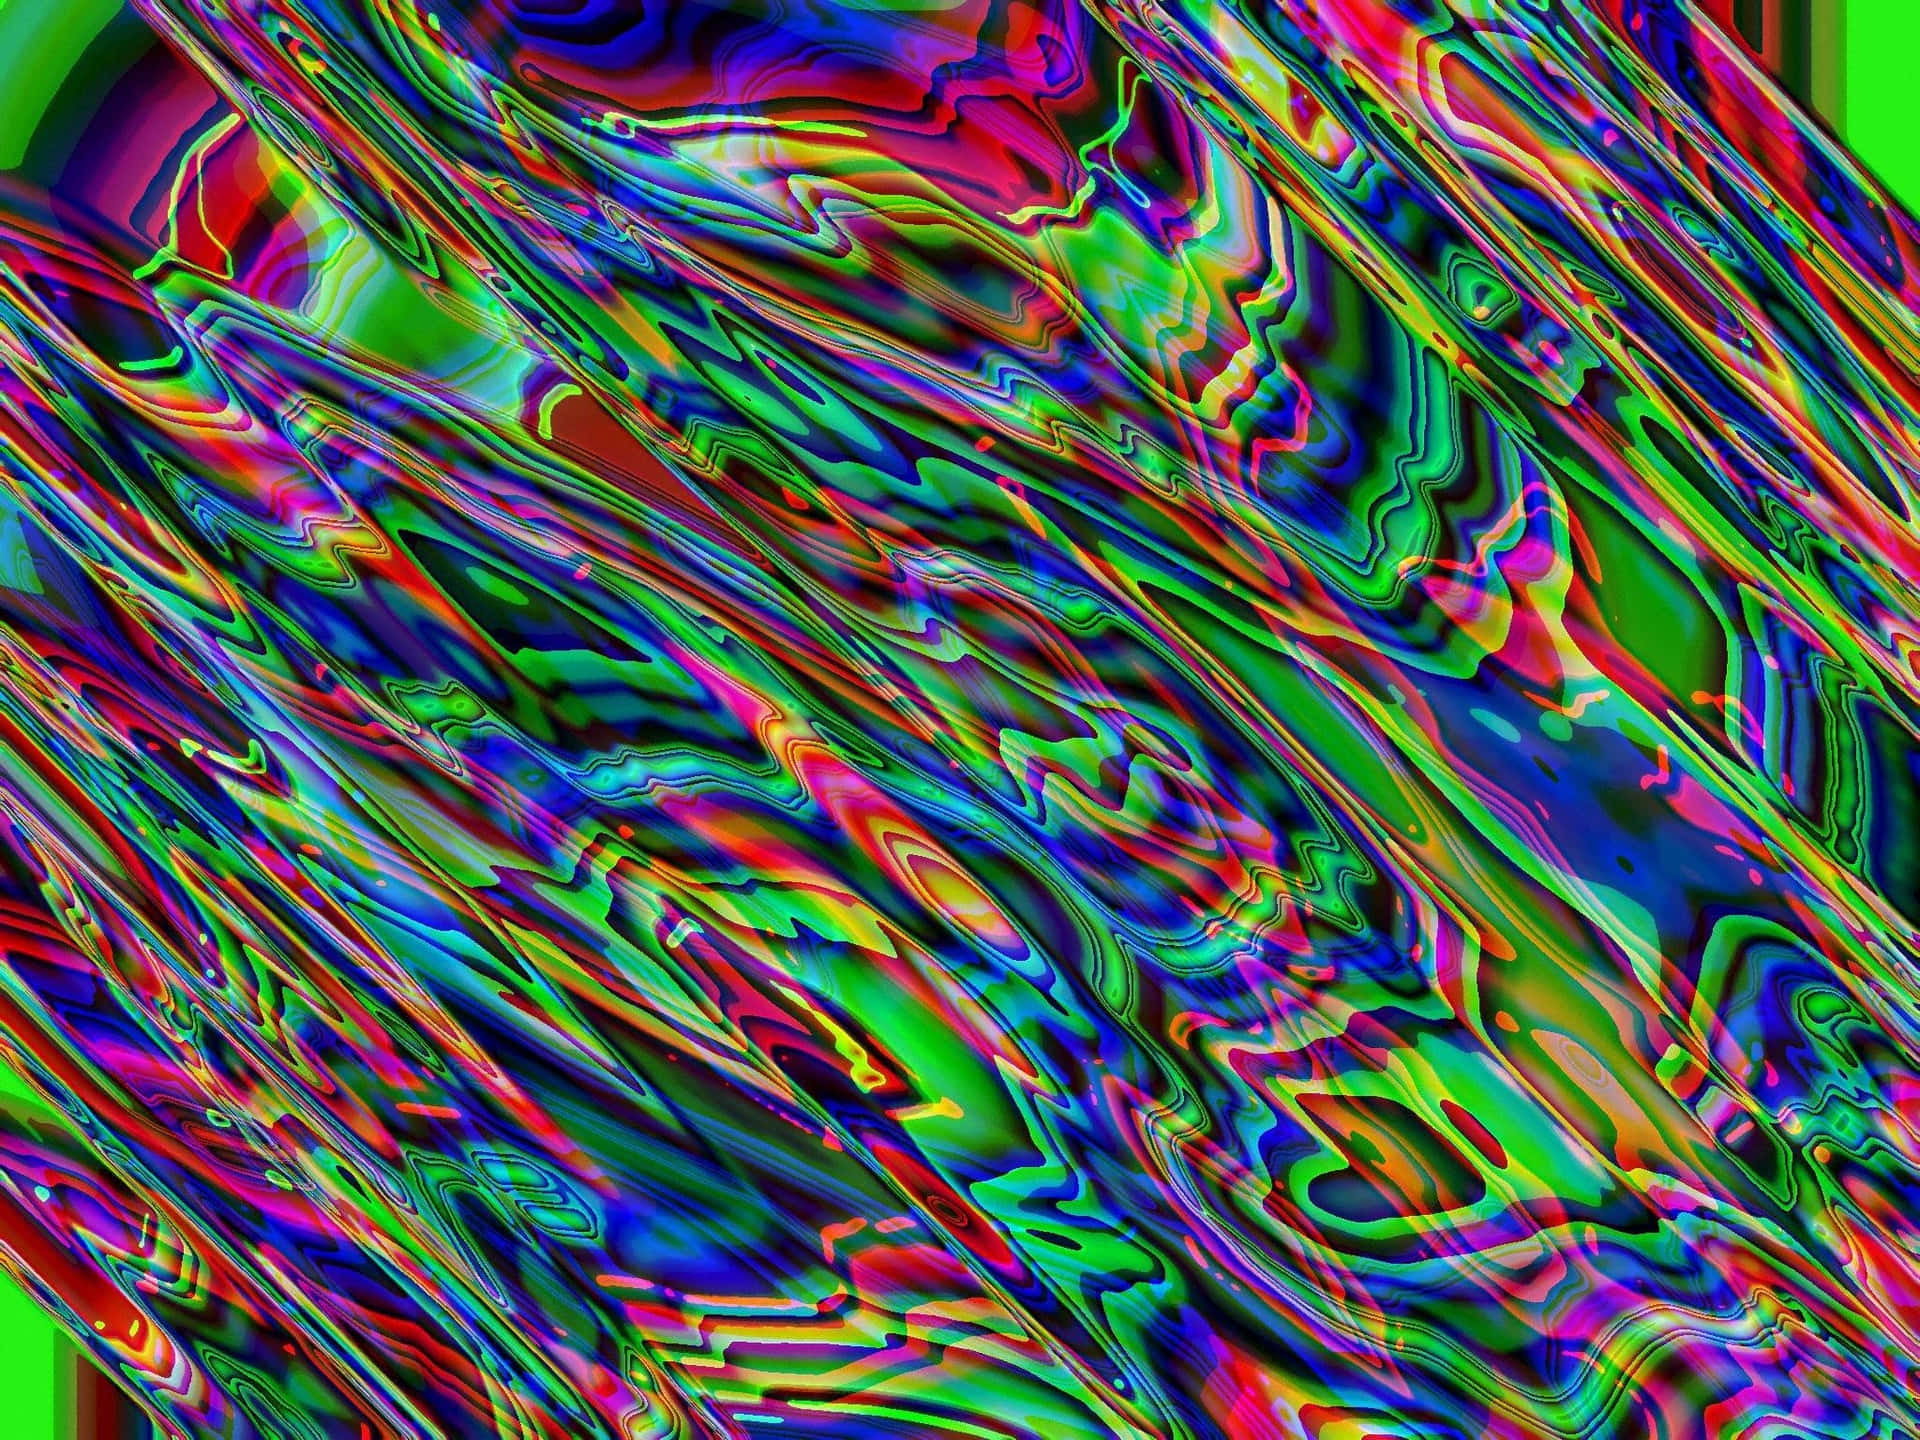 A Colorful Abstract Image Of A Wave